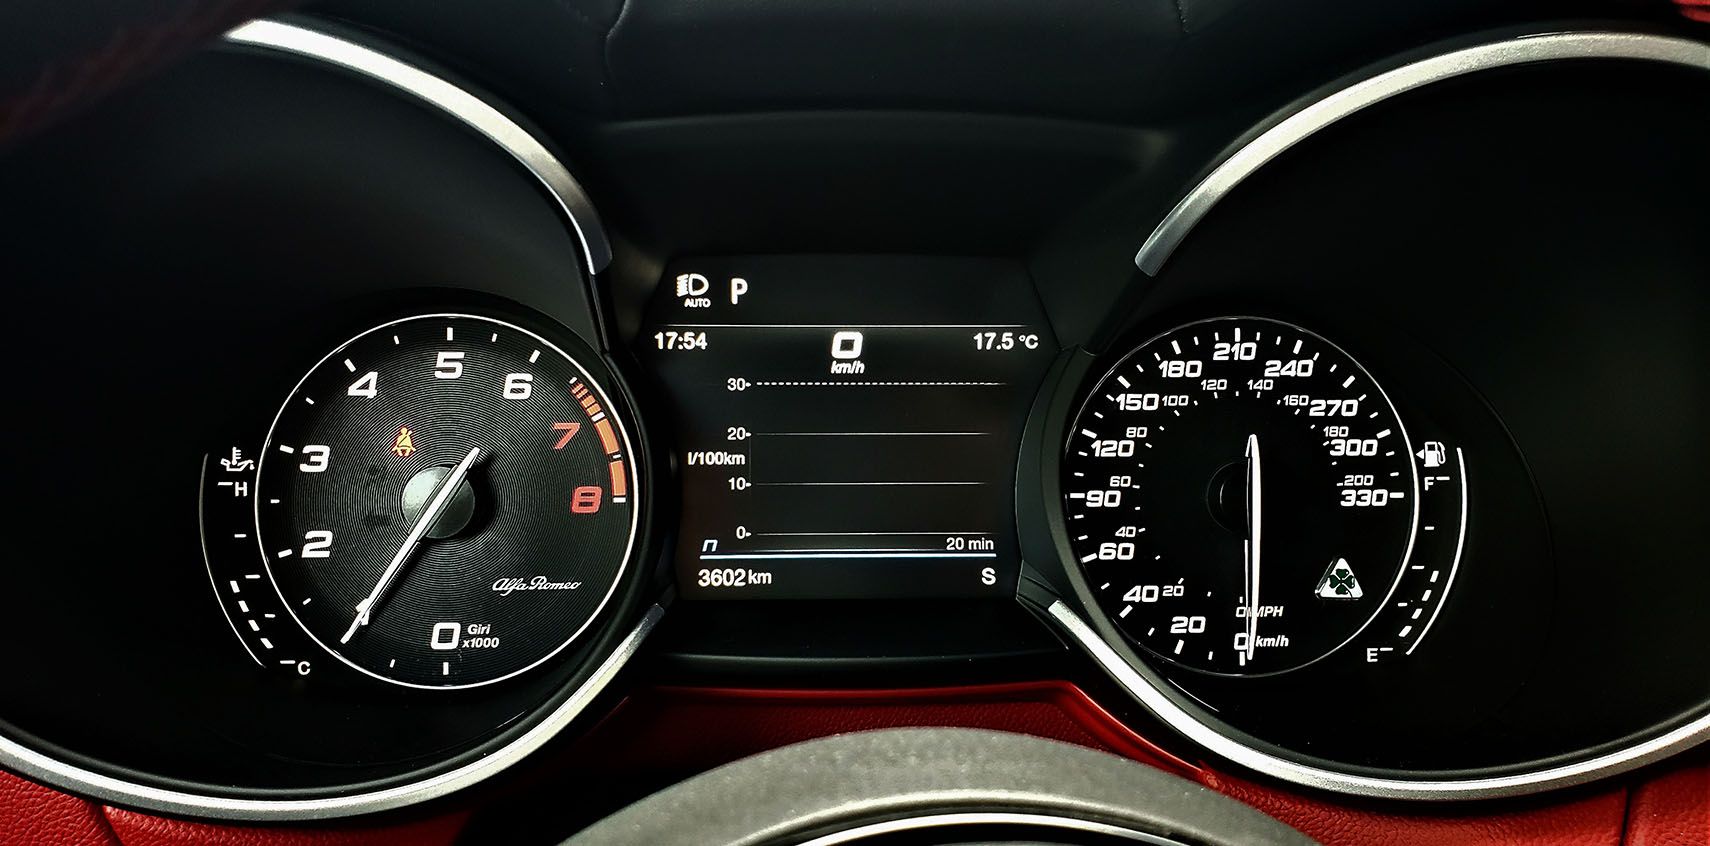 Classic gauge cluster is solely focused on performance.